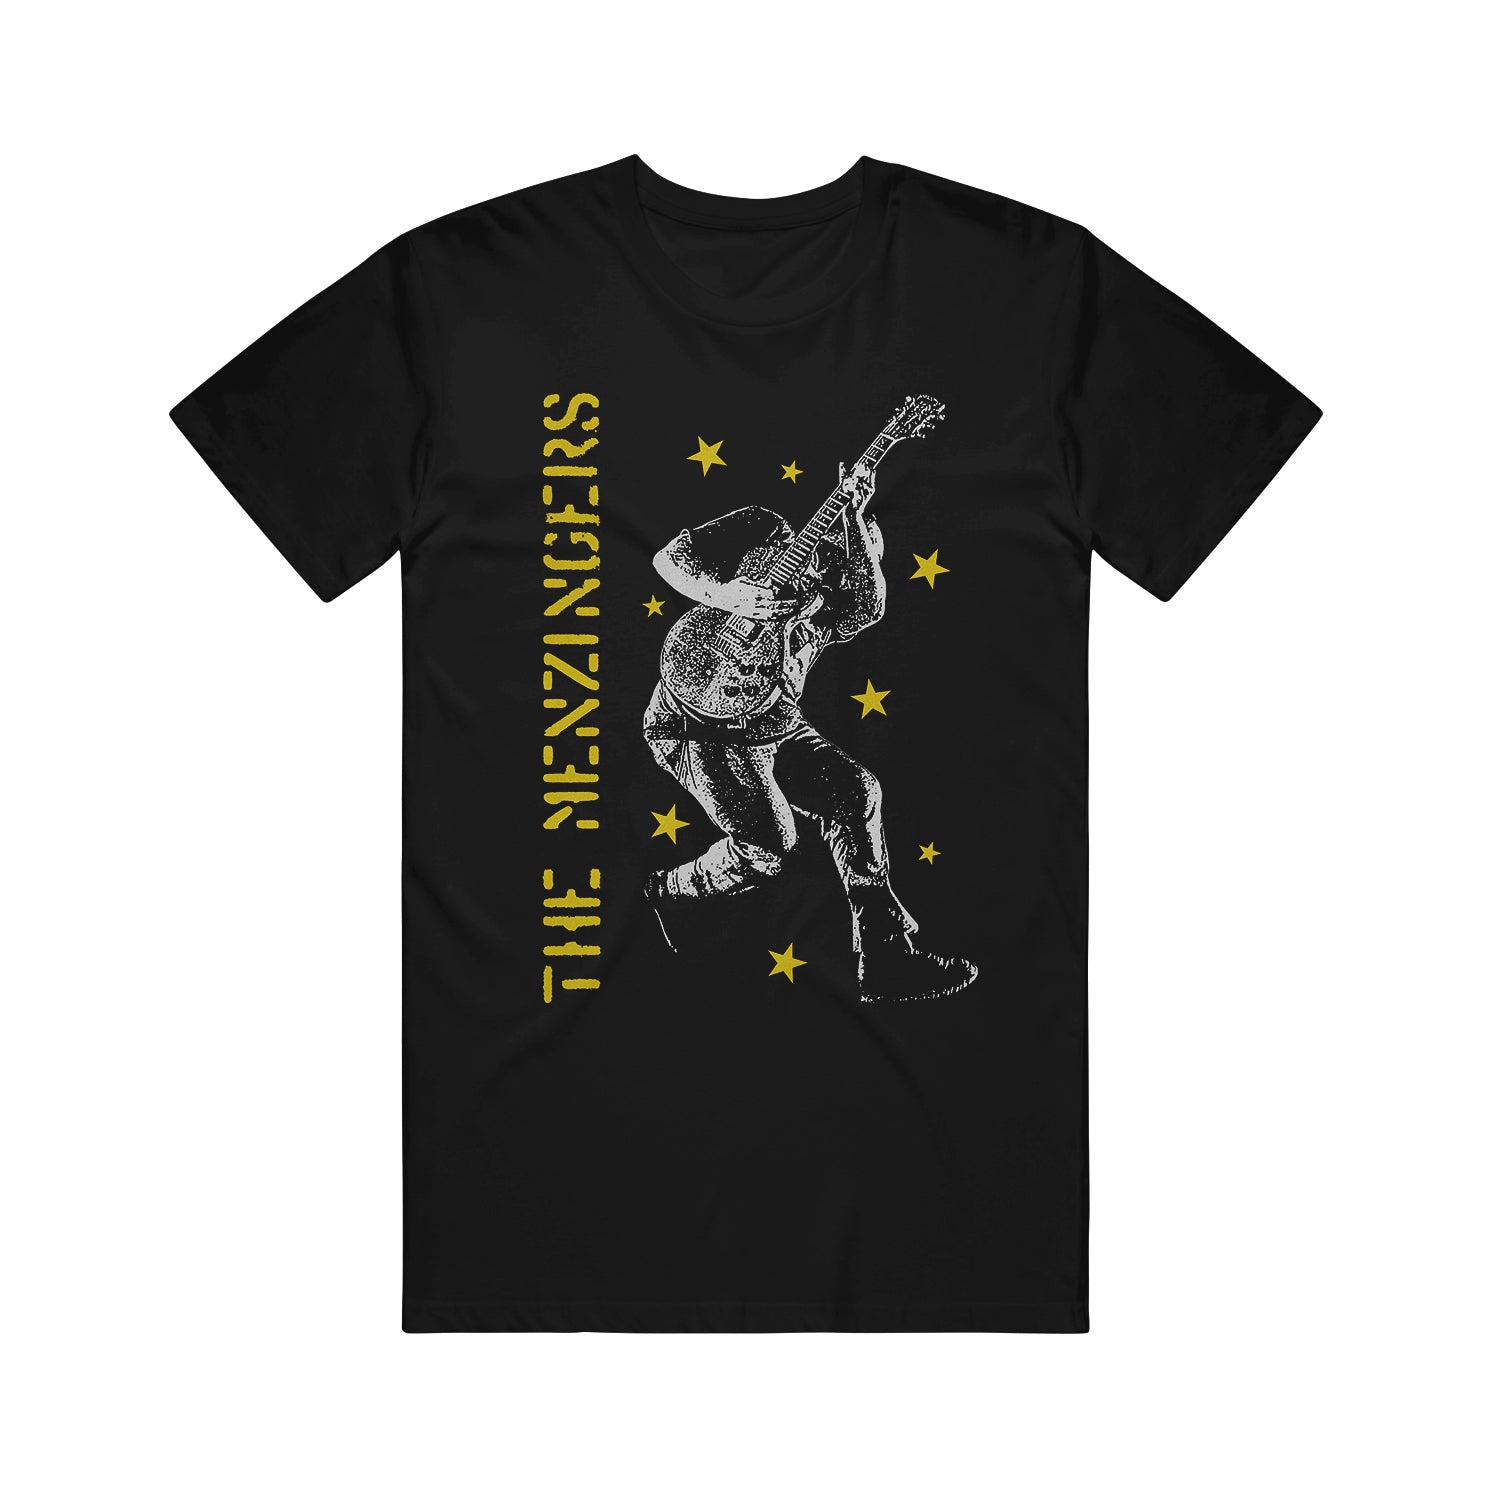 image of the front of a black tee shirt on a white background. tee has a full body print in yellow on the left side vertically says the menzingers with yellow stars all over and in white an image of a man playing a guitar.